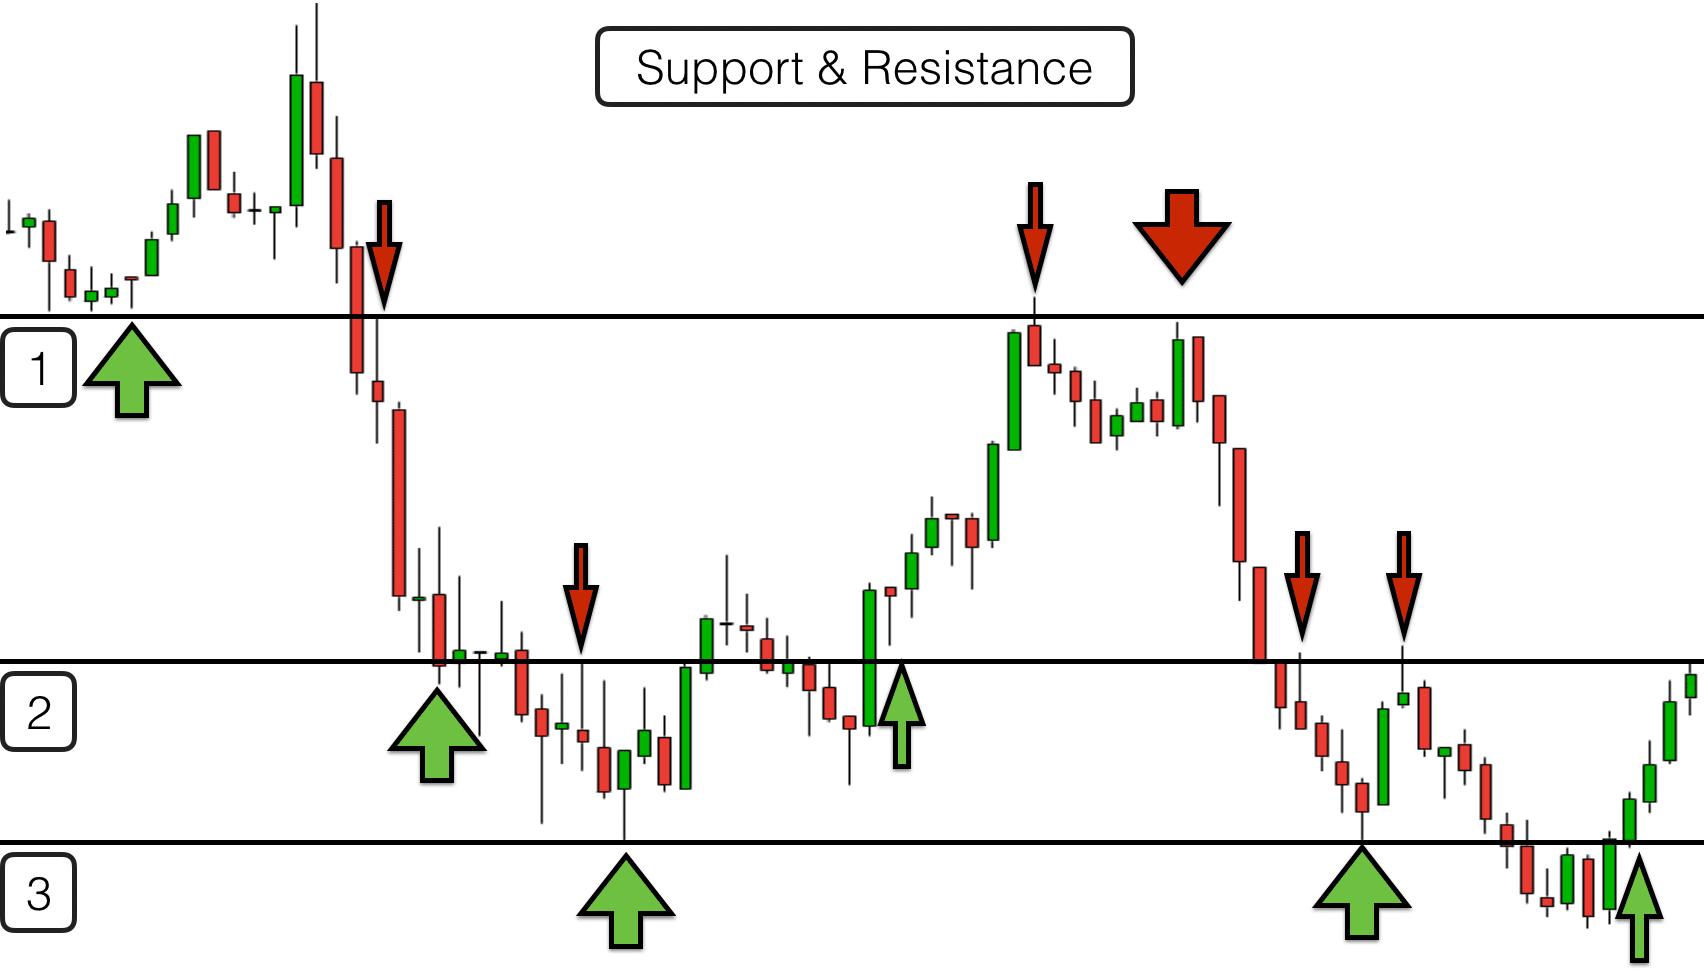 Live forex support and resistance levels ruble account on forex